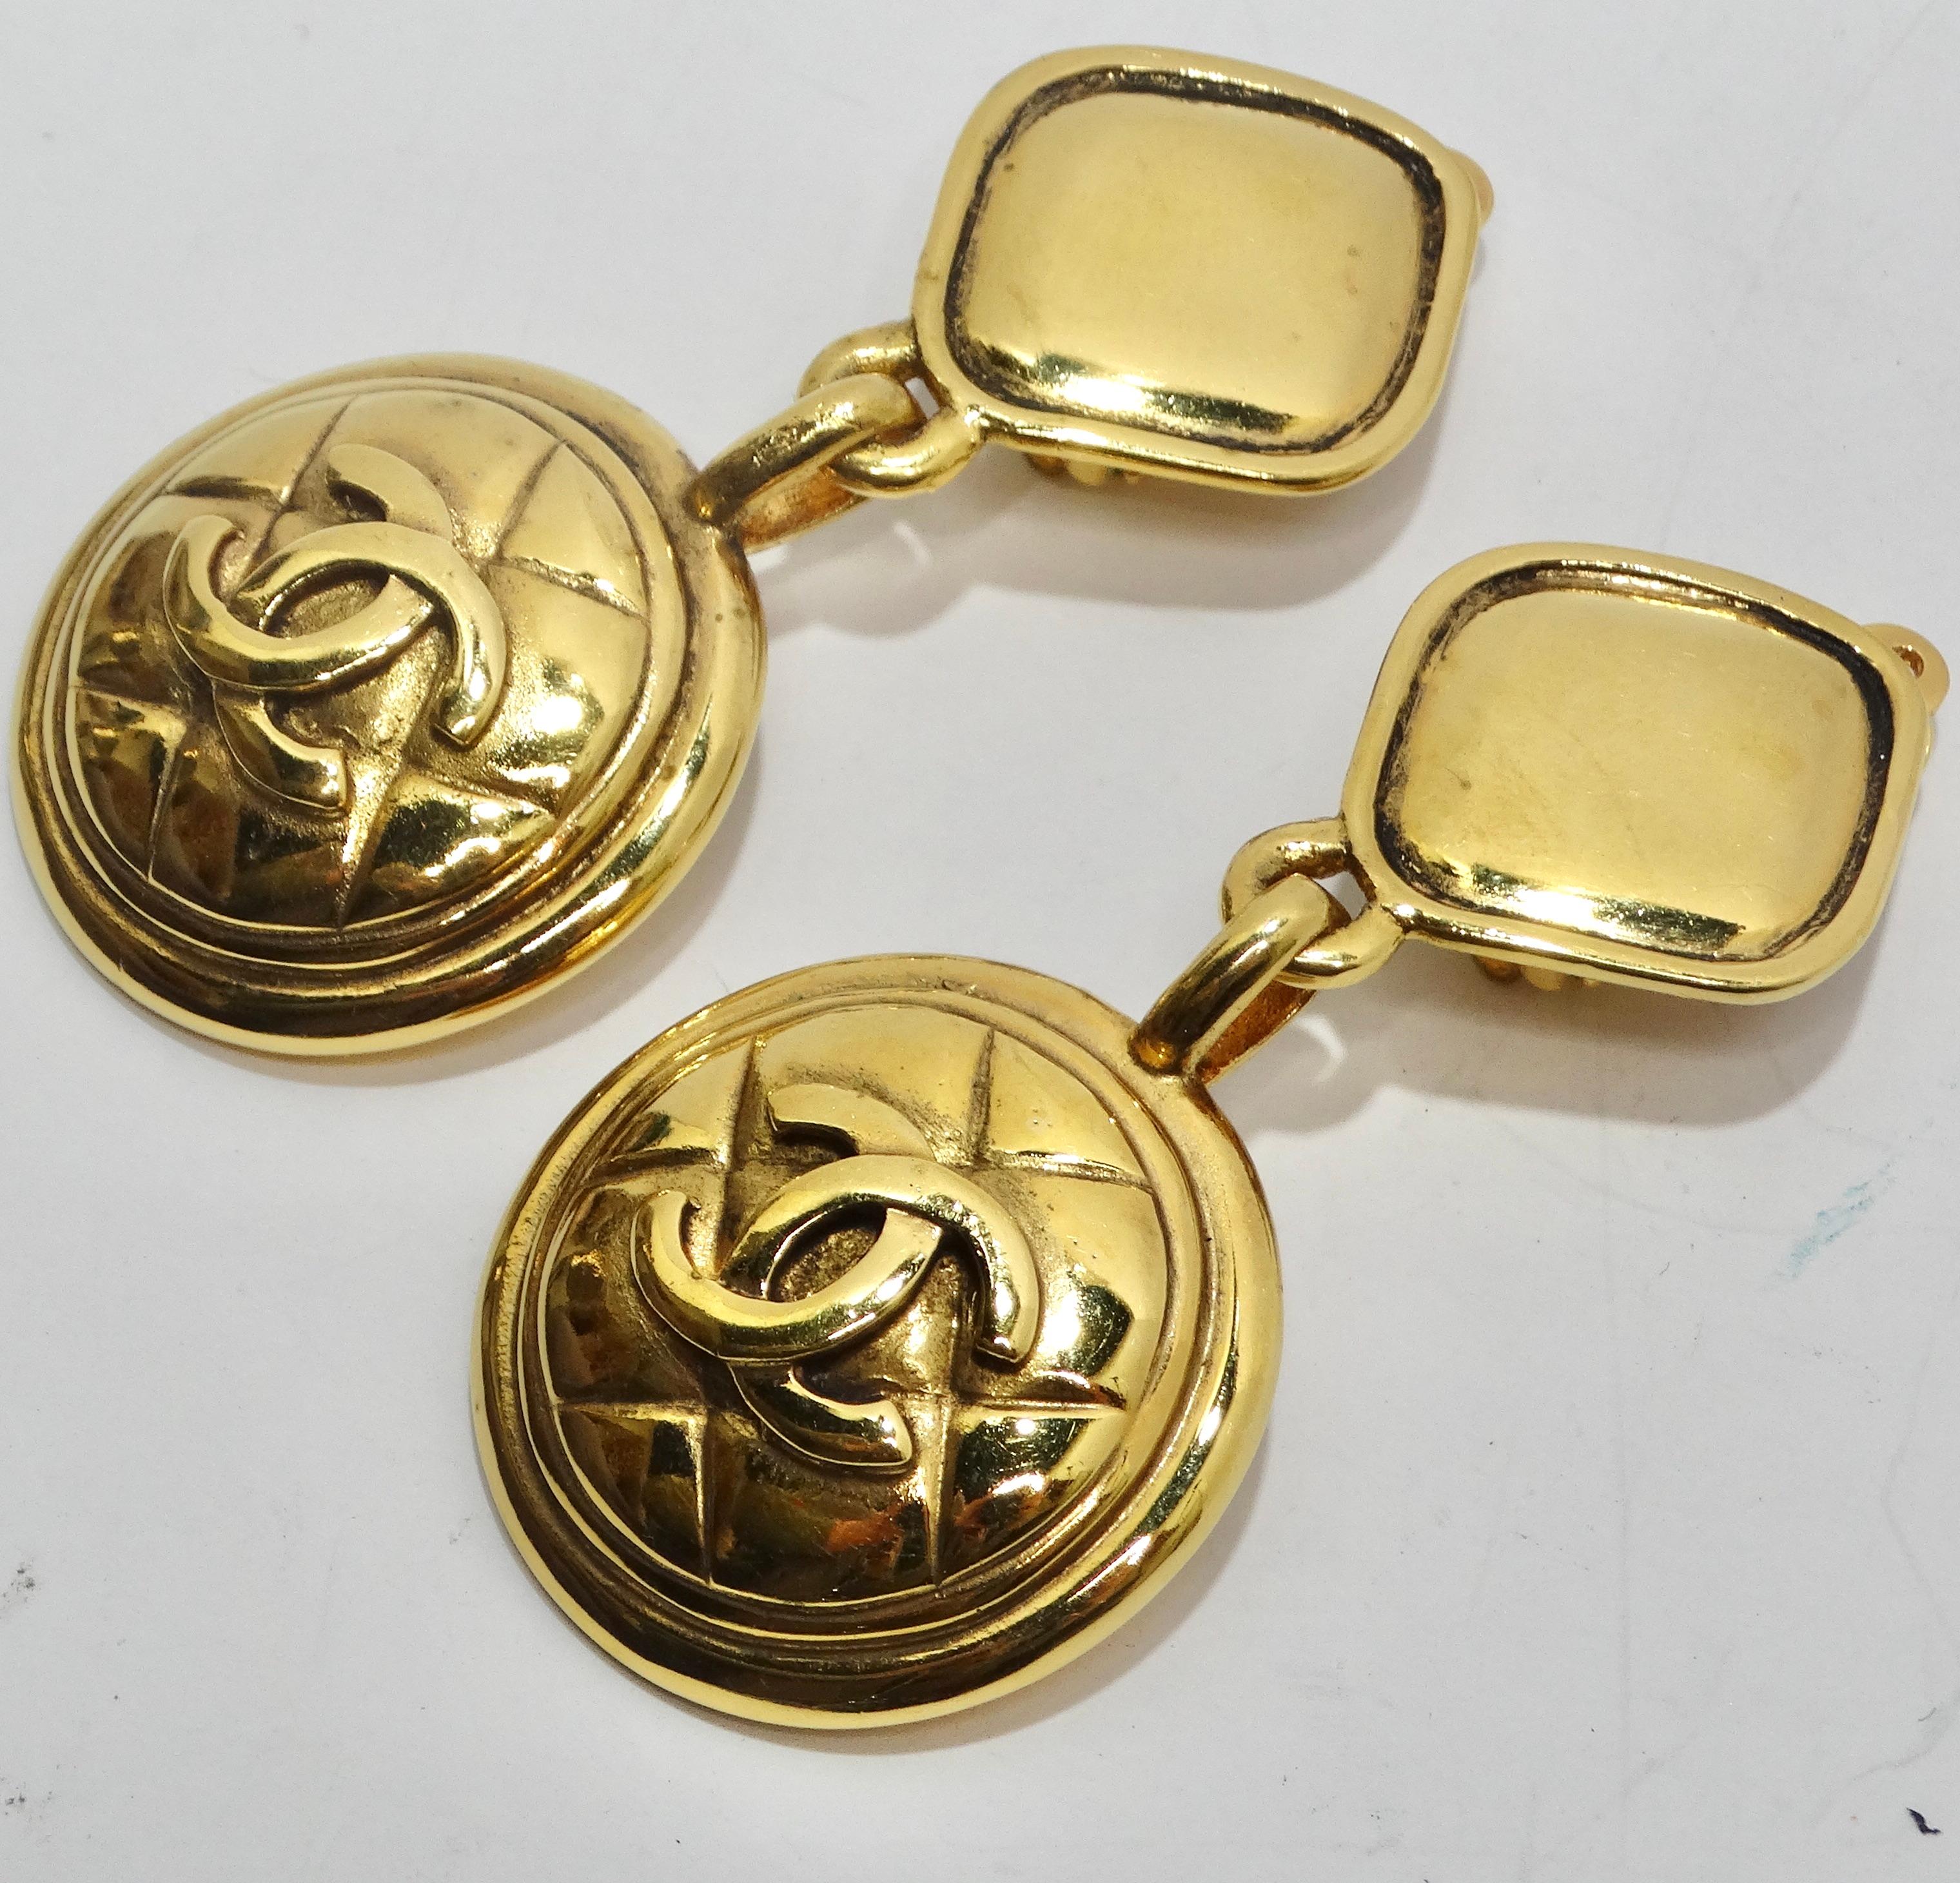 Chanel 1980s Gold Tone Quilted Drop Earrings In Excellent Condition For Sale In Scottsdale, AZ